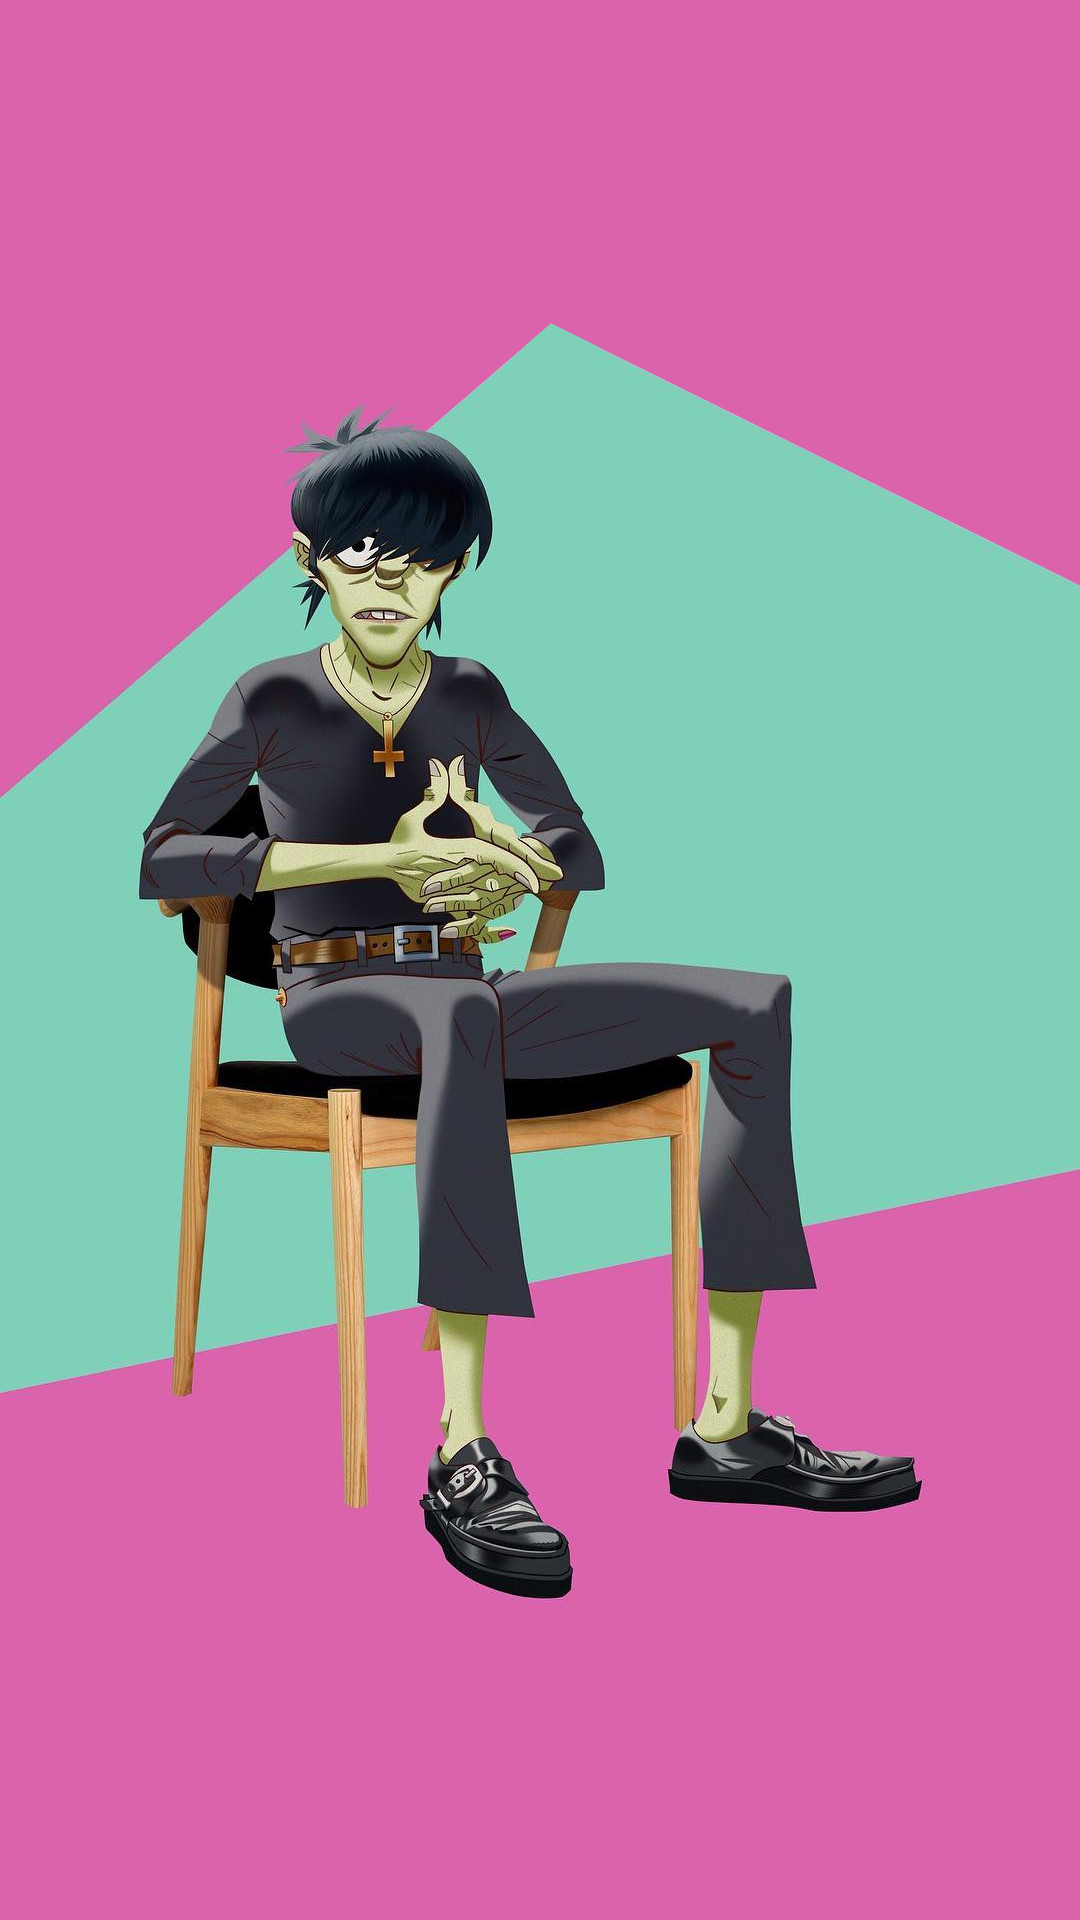 Two Simple Phone Wallpapers I Made From Pictures On - Gorillaz Phase 4 Murdoc - HD Wallpaper 